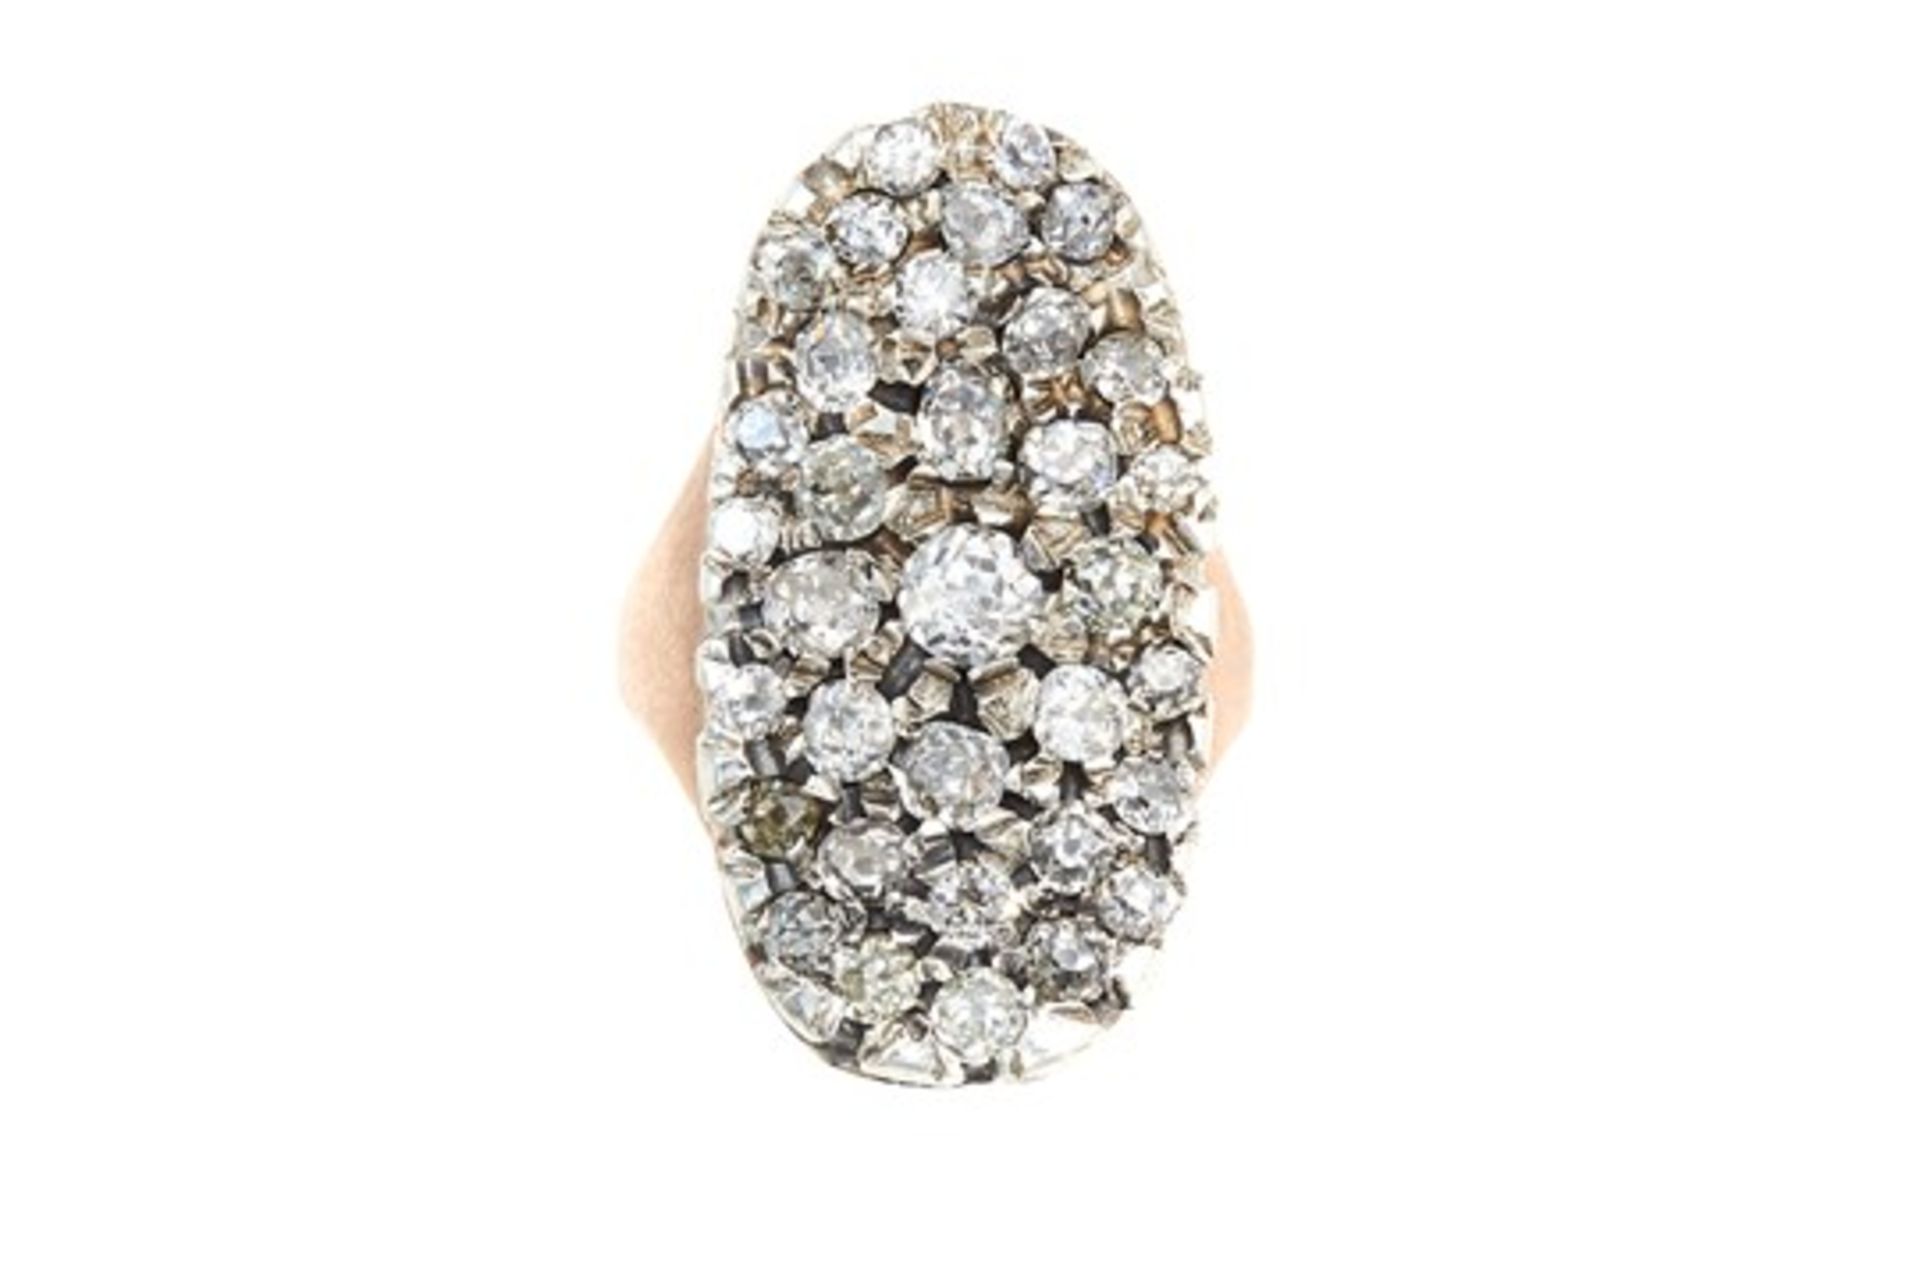 AN ANTIQUE DIAMOND CLUSTER RING in yellow gold and silver, the elongated oval face jewelled with old